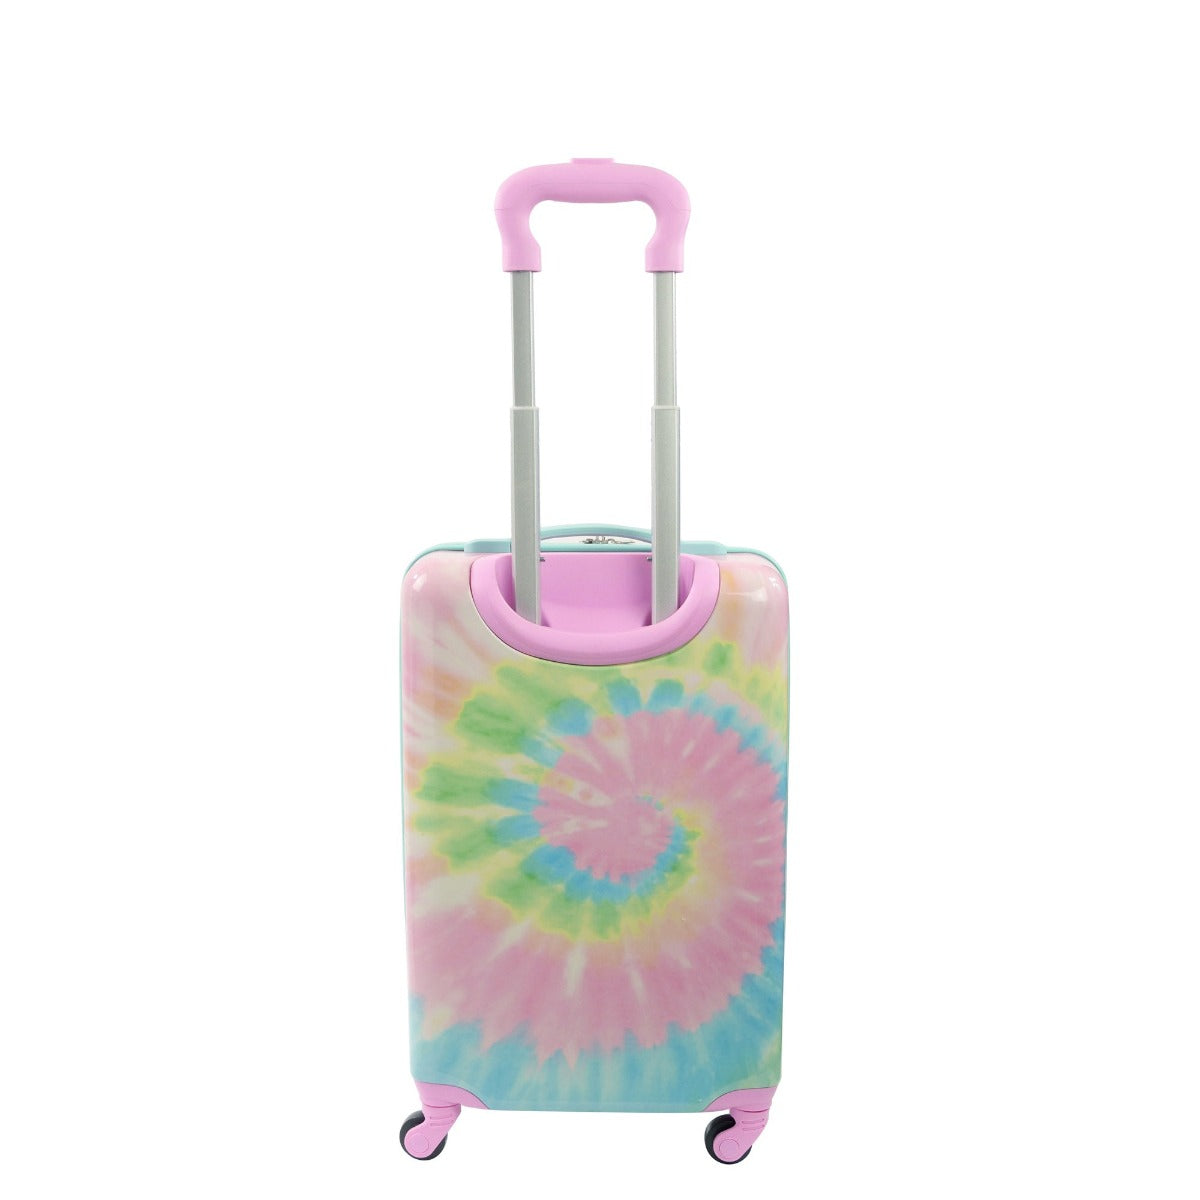 Ful Disney minnie mouse tye dye kids 21" carry on spinner luggage - best travelling suitcases for kids